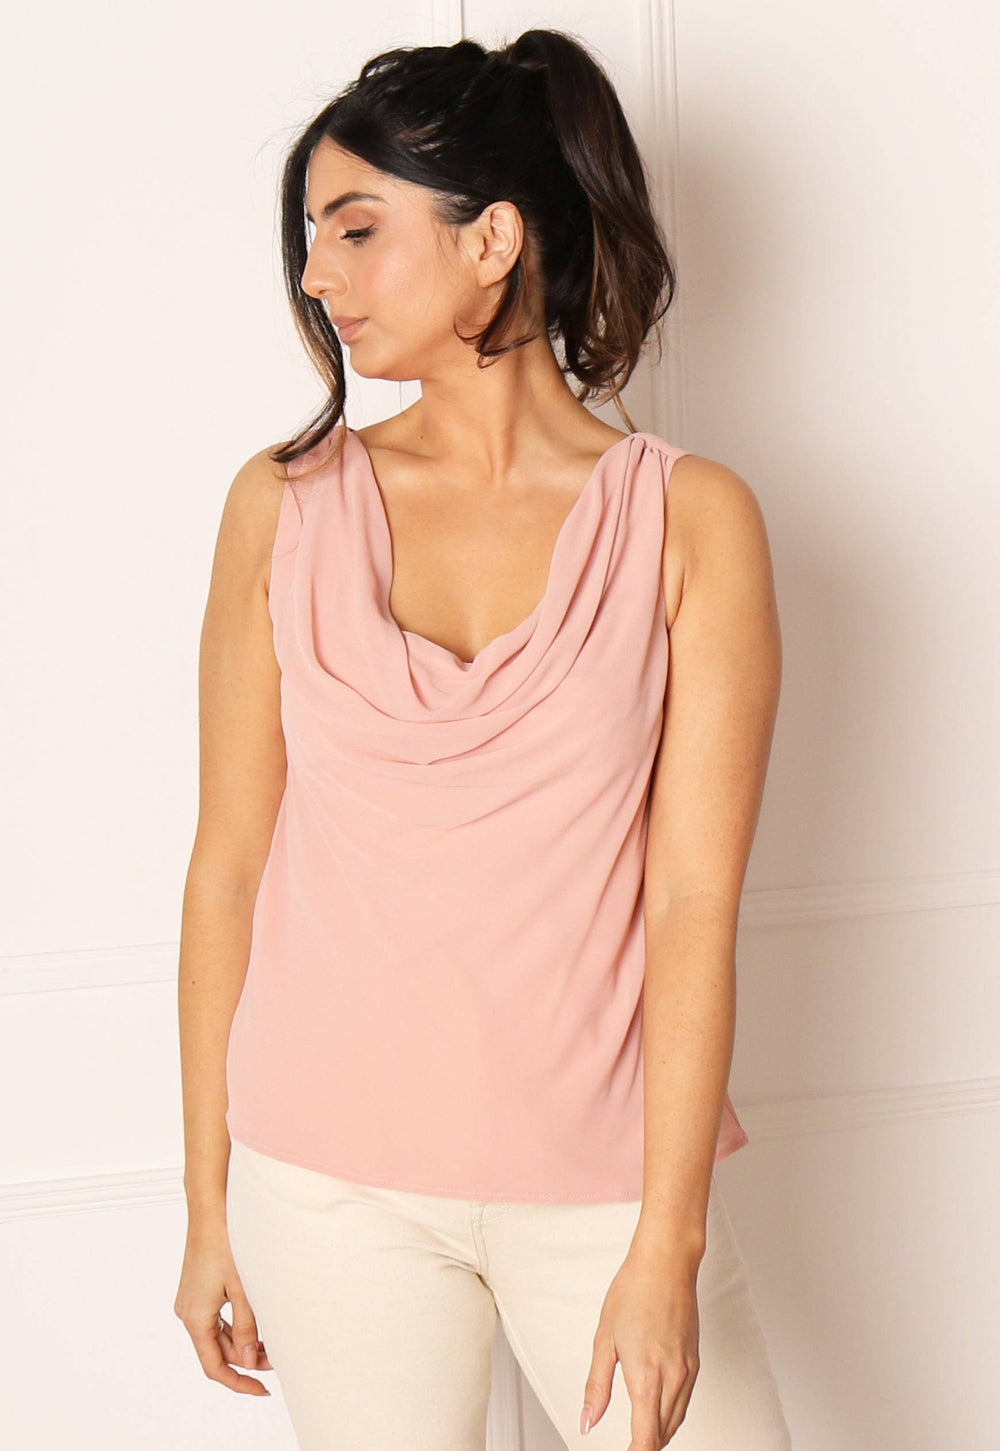 VILA Cowl Neck Top in Dusky Pink - One Nation Clothing